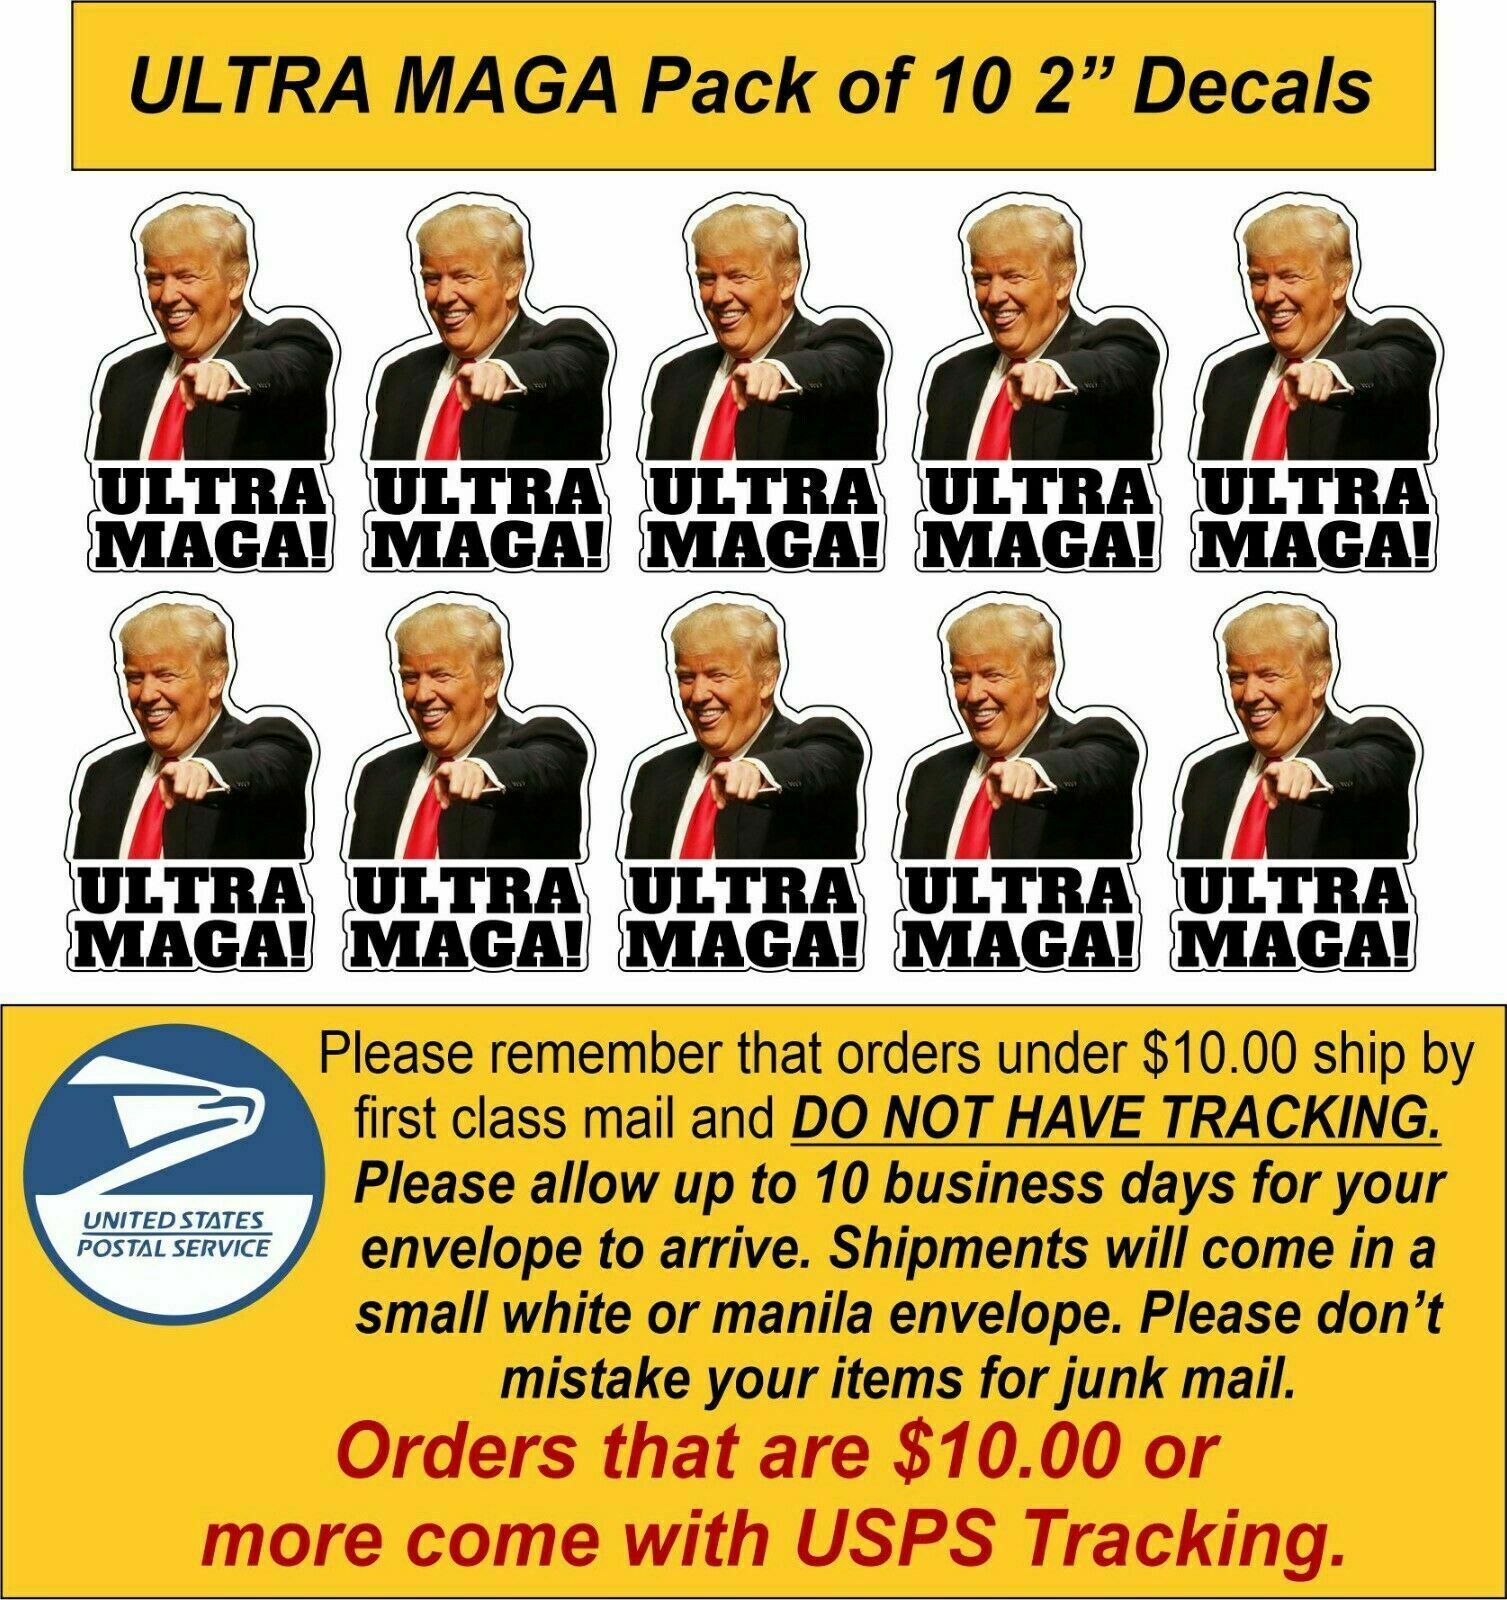 Ultra Maga Sticker Pack of 10 Decals 2" x 1.4" Trump Pointing ULTRA MAGA Decal - Powercall Sirens LLC